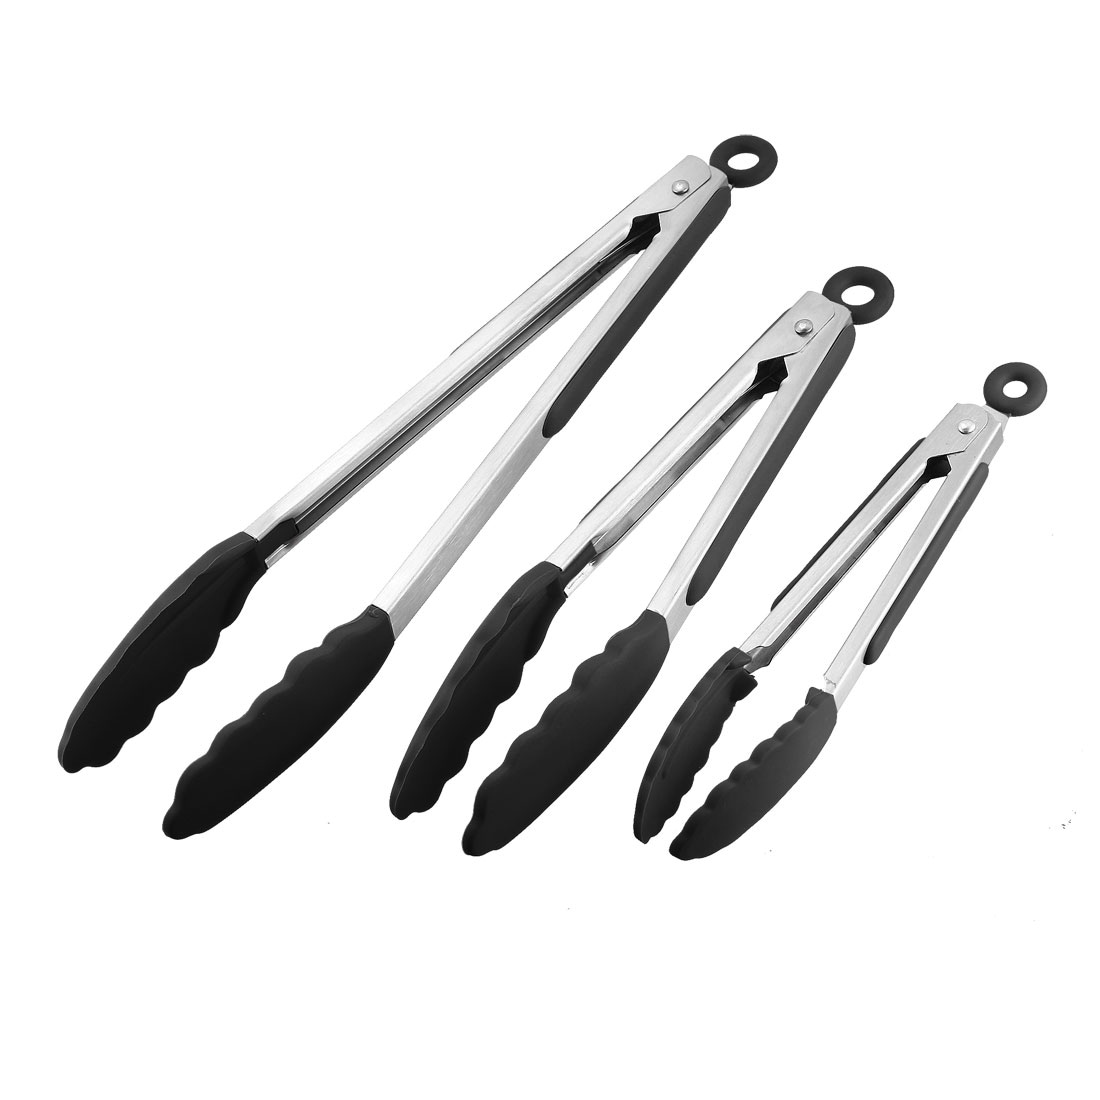 3-7, 9, 12 inch, heavy duty, nonstick, stainless steel silicone kitchen  tool tongs spatulas whisk